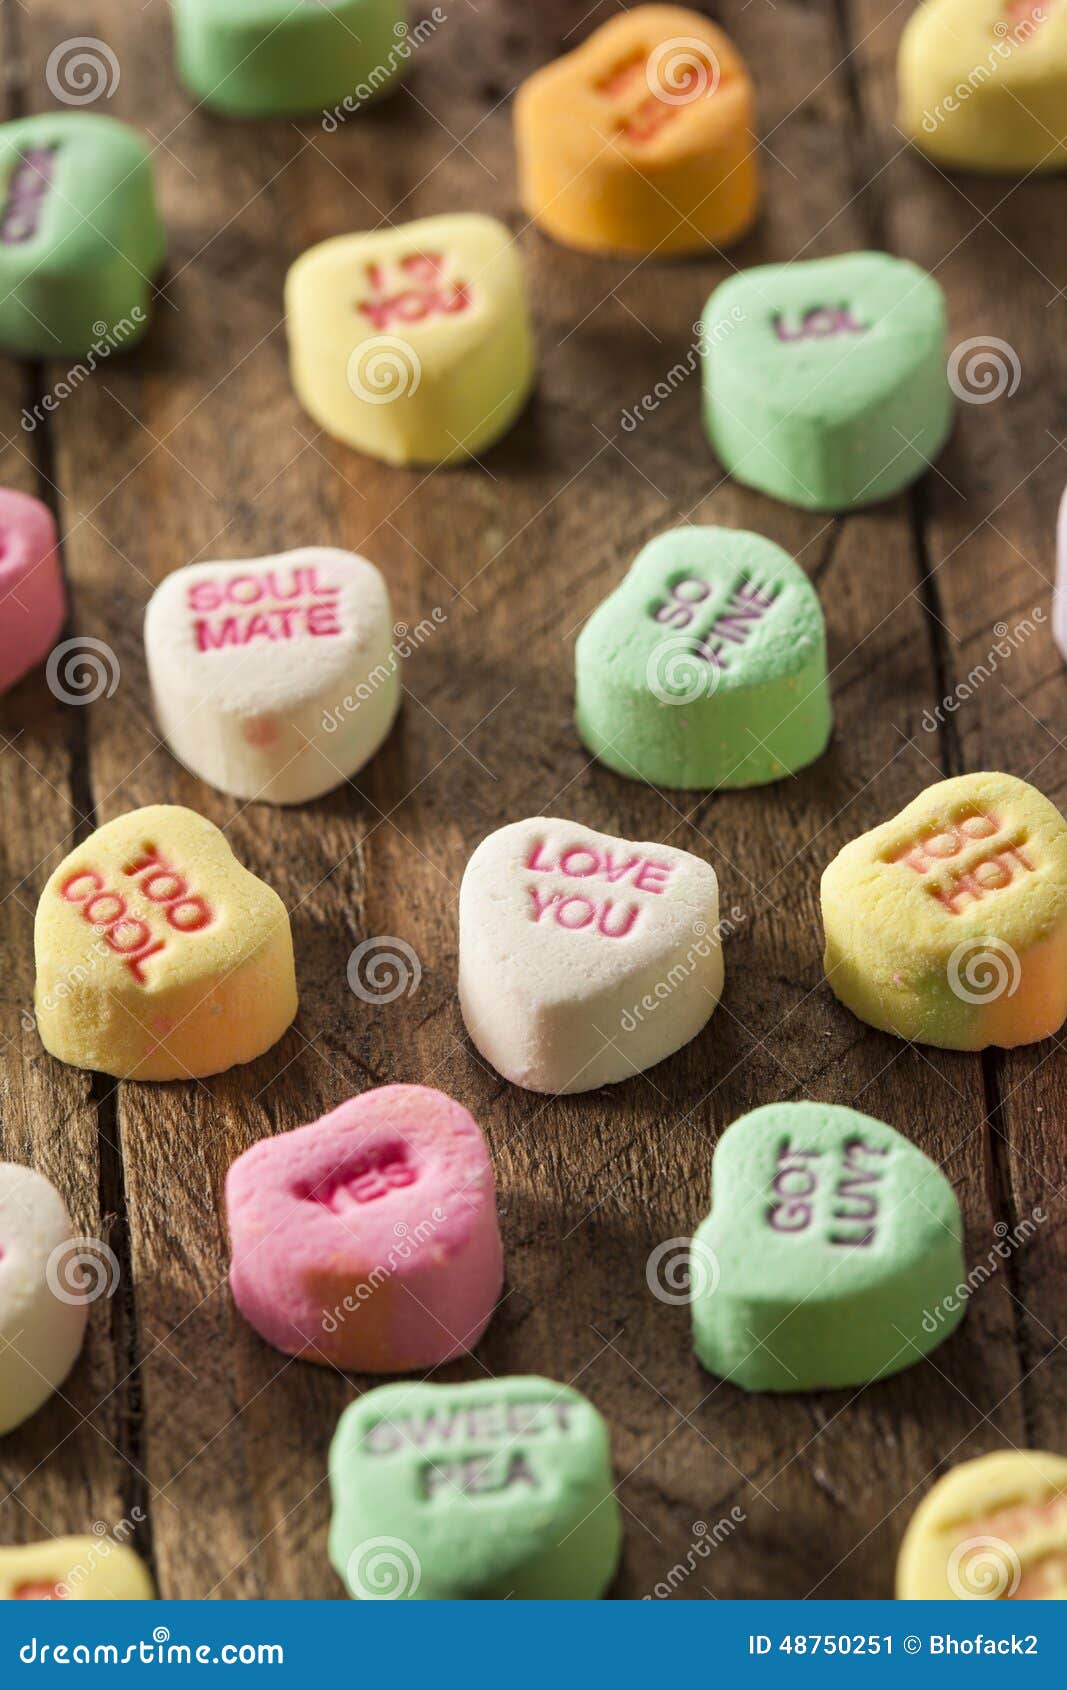 Colorful Candy Conversation Hearts Stock Image - Image of yellow, flirt ...